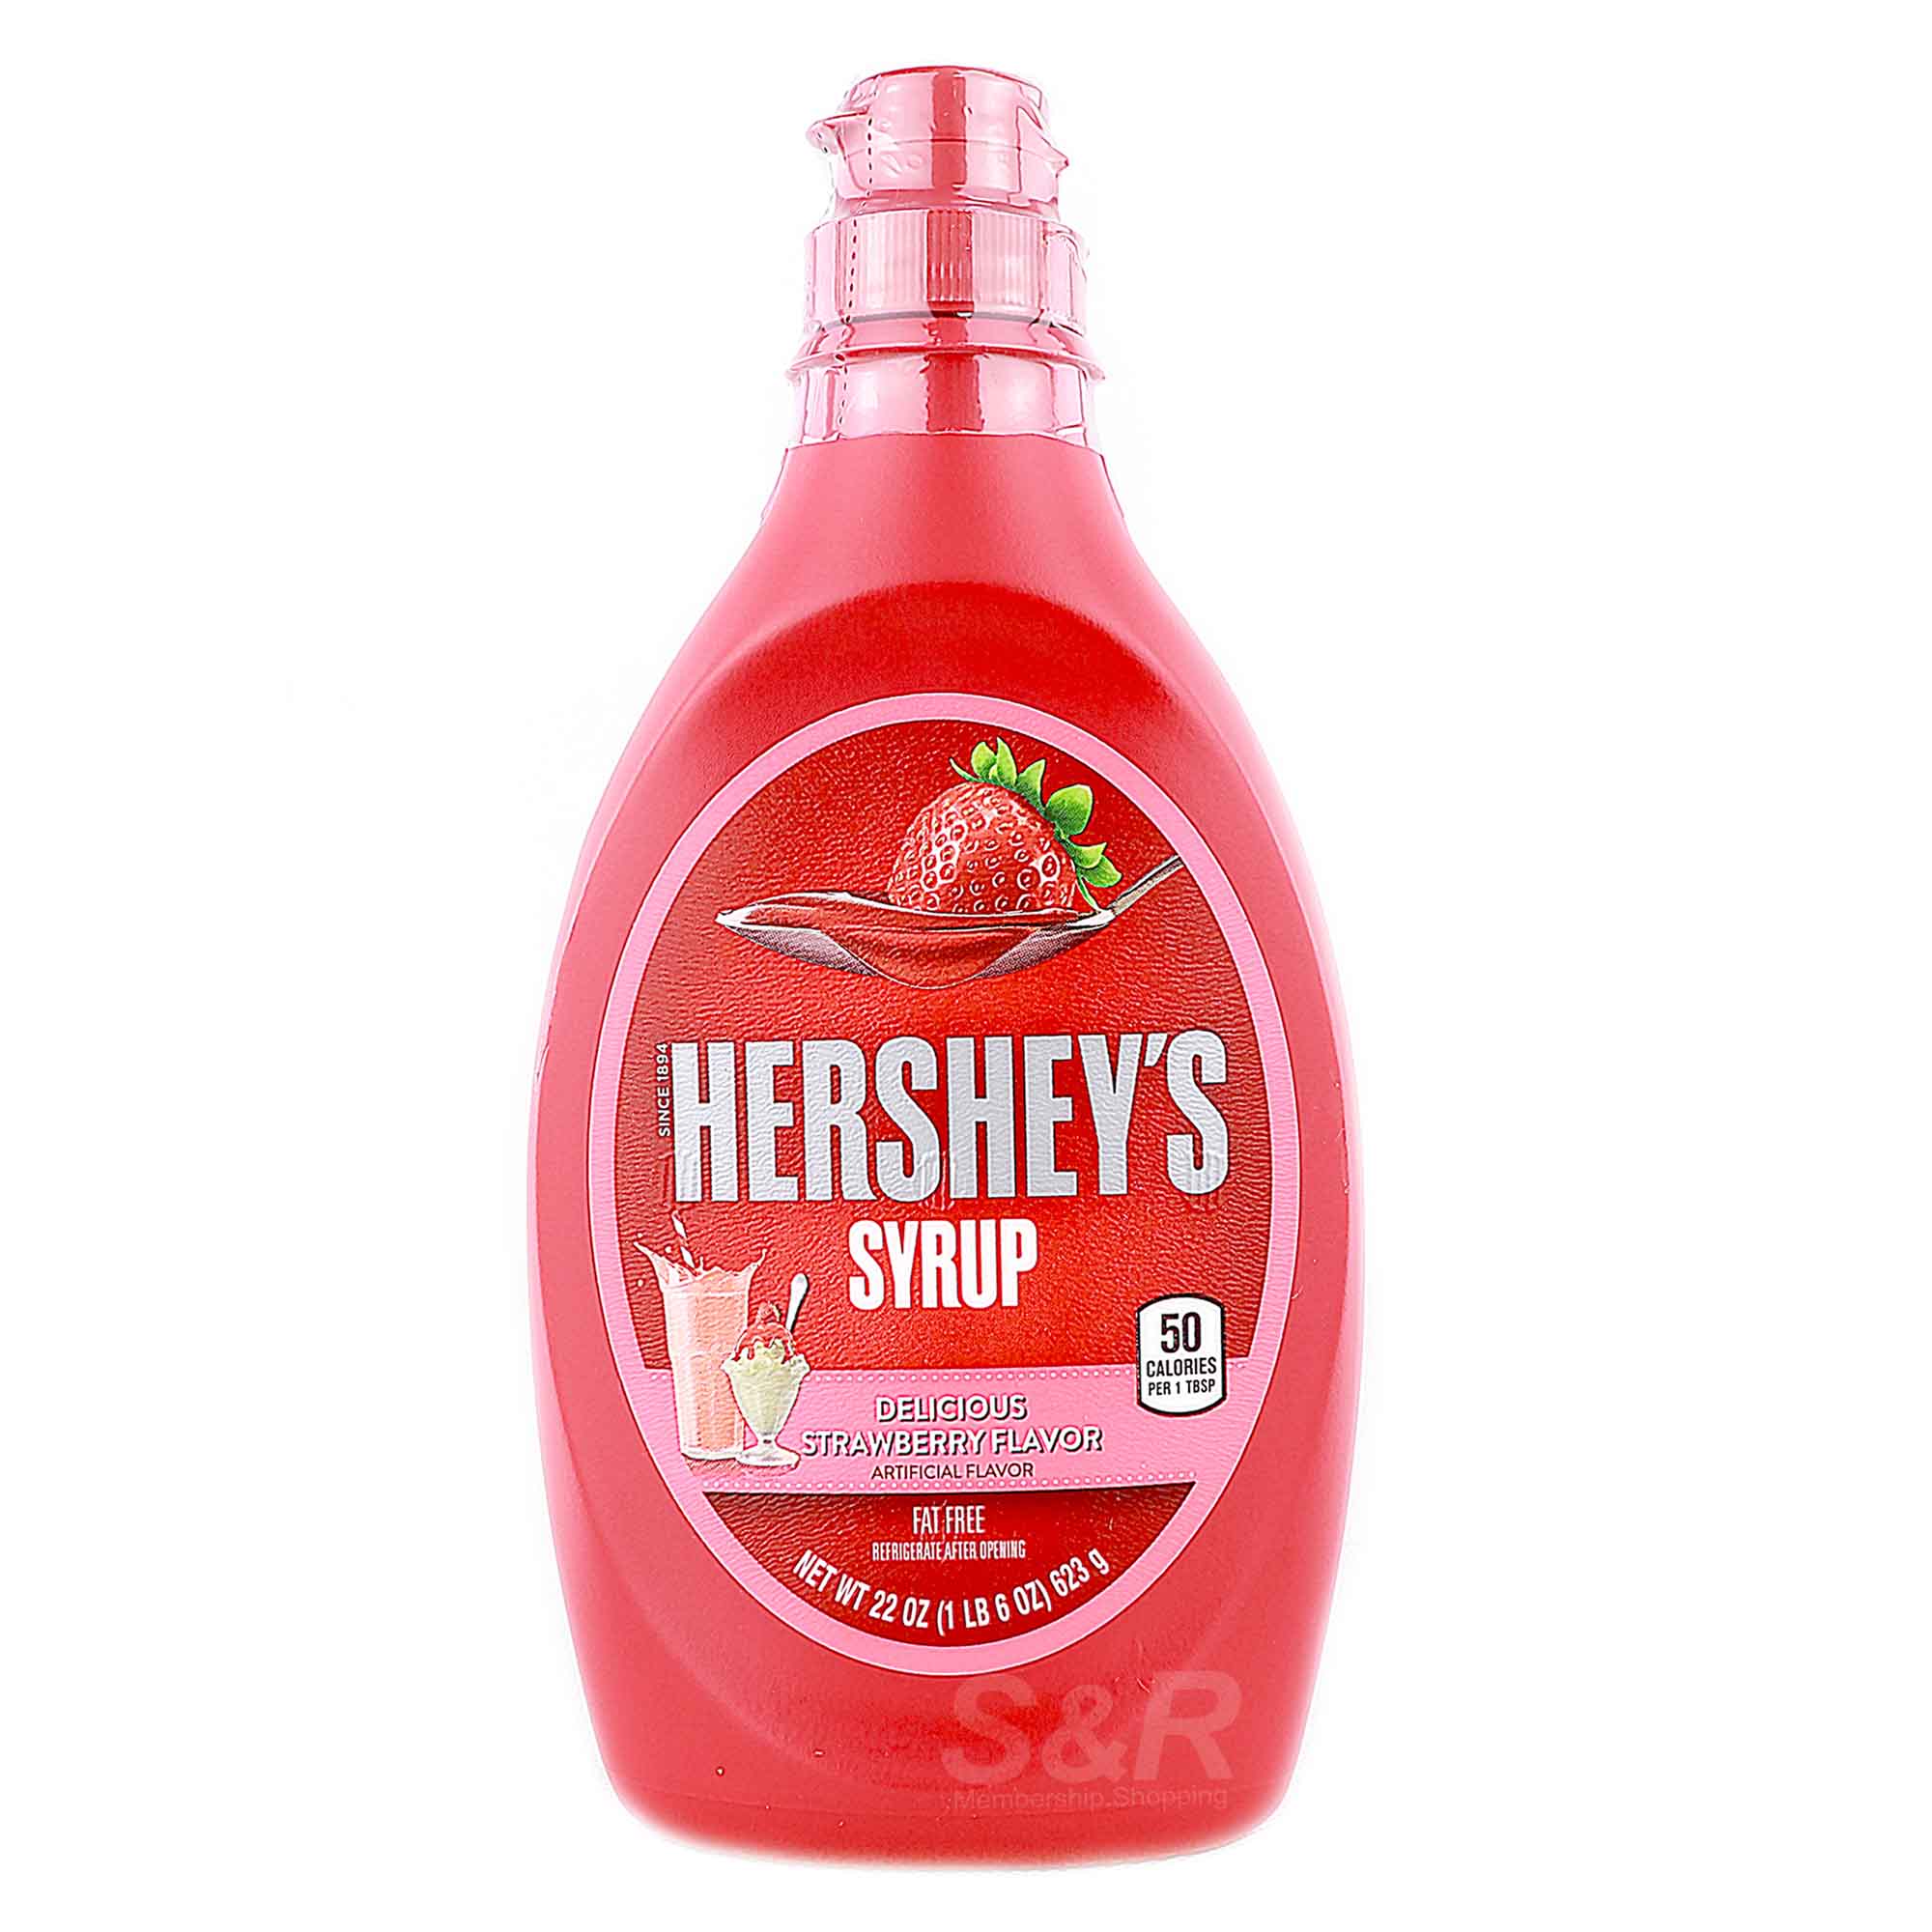 Hershey's Syrup Delicious Strawberry Flavor 623g